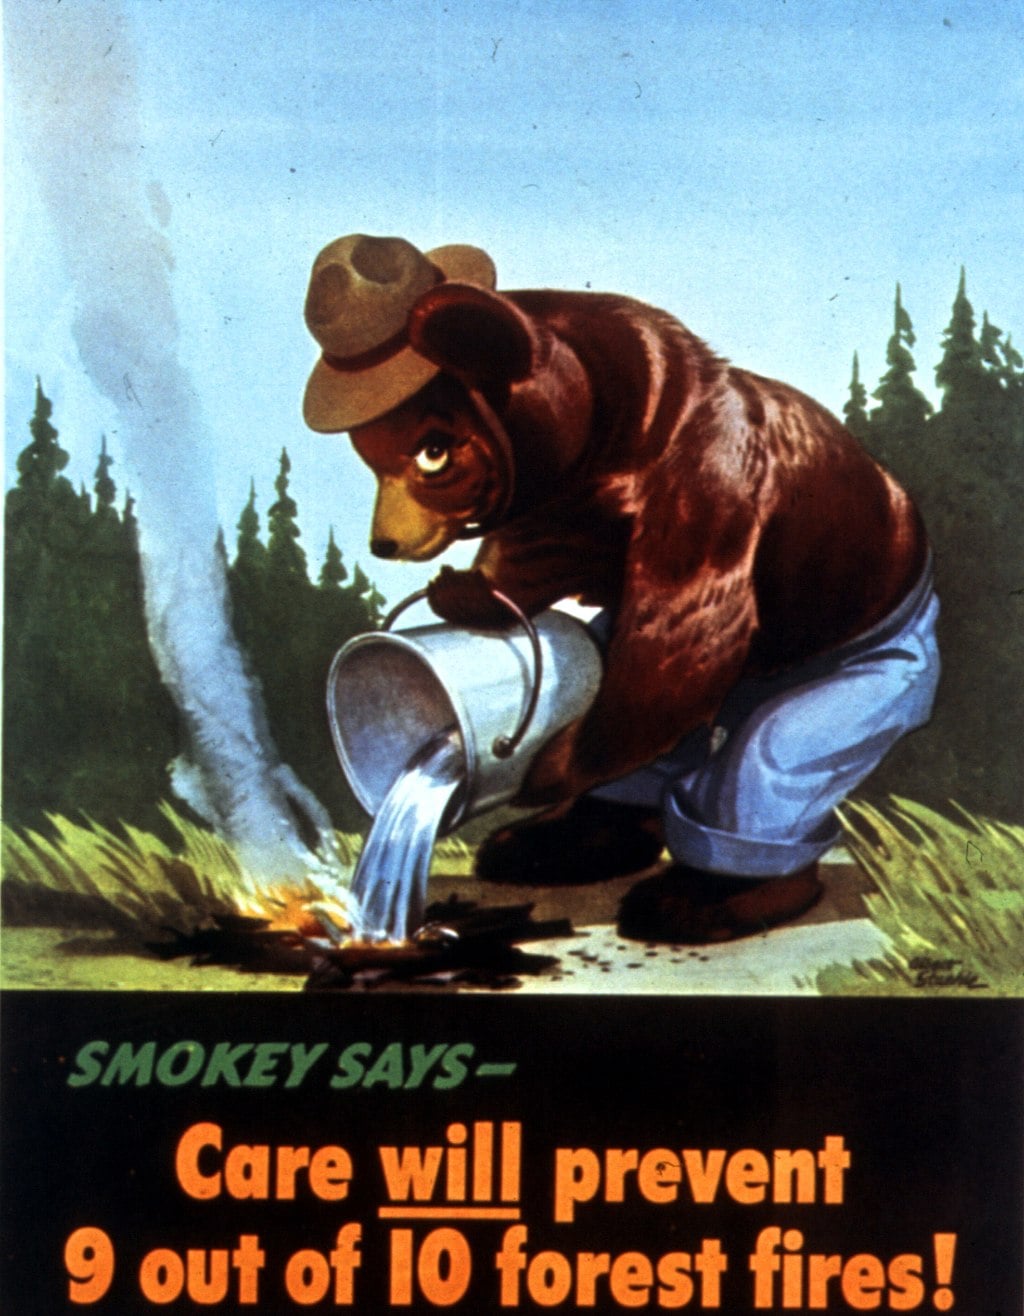 Poster of Smokey Bear from 1945